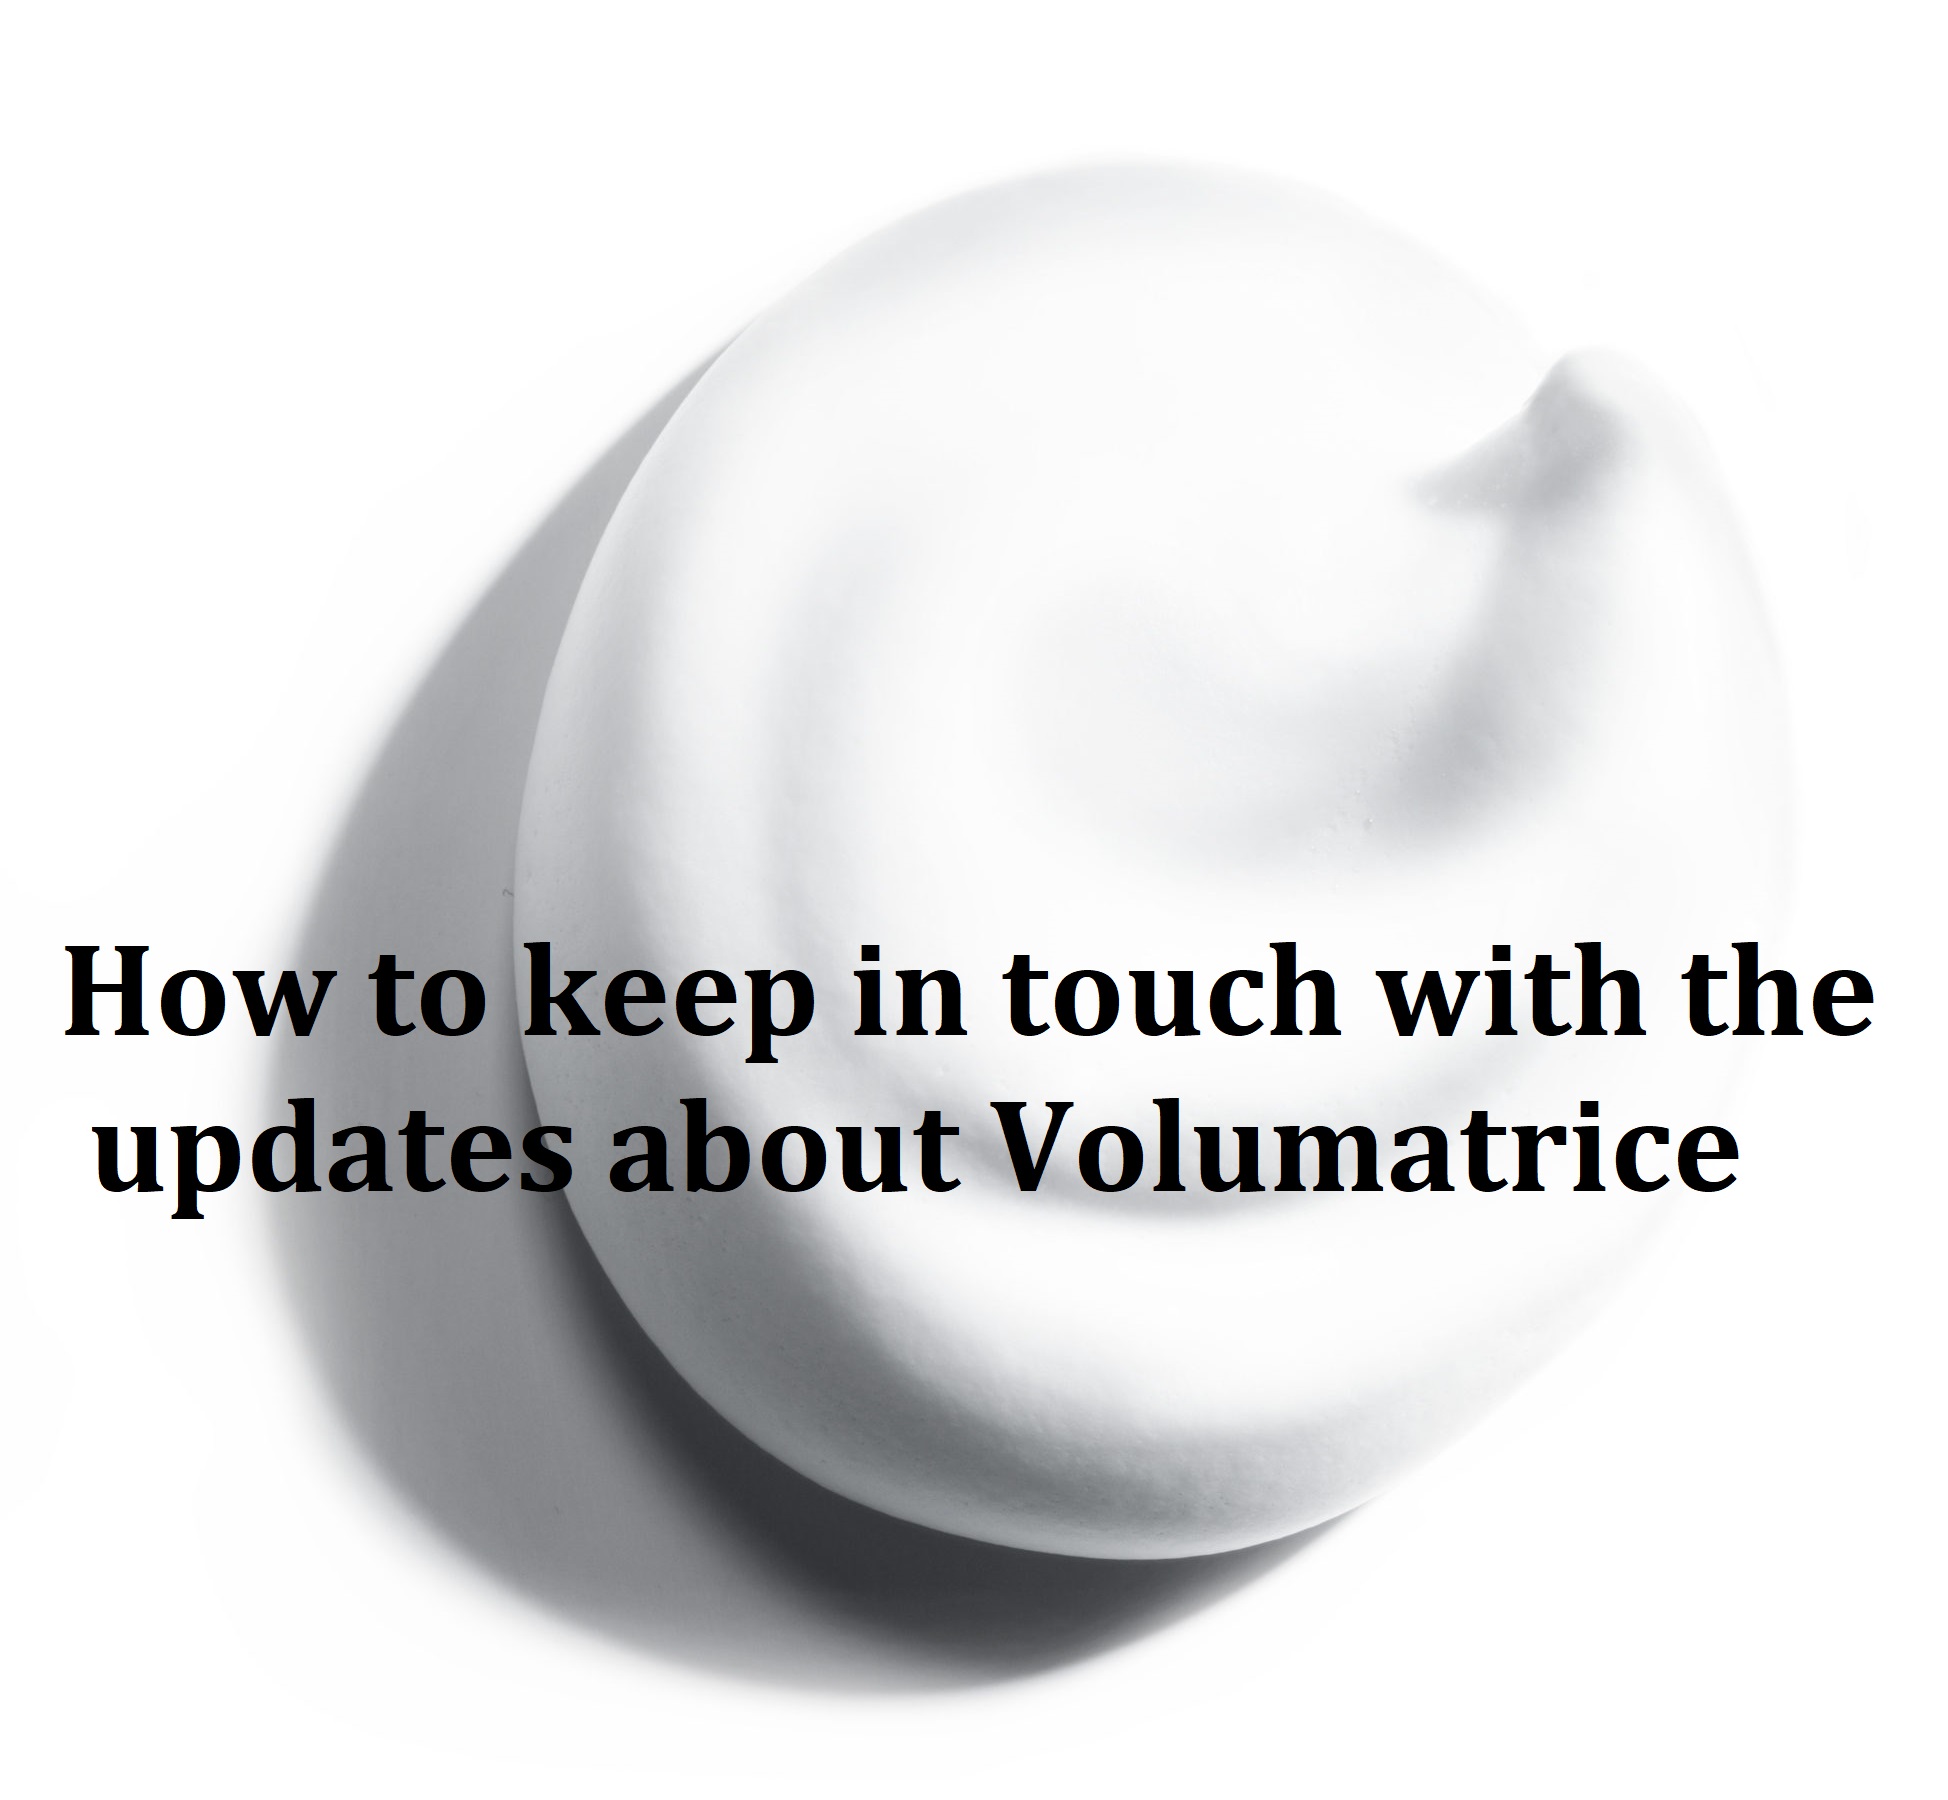 How to keep in touch with the updates about Volumatrice